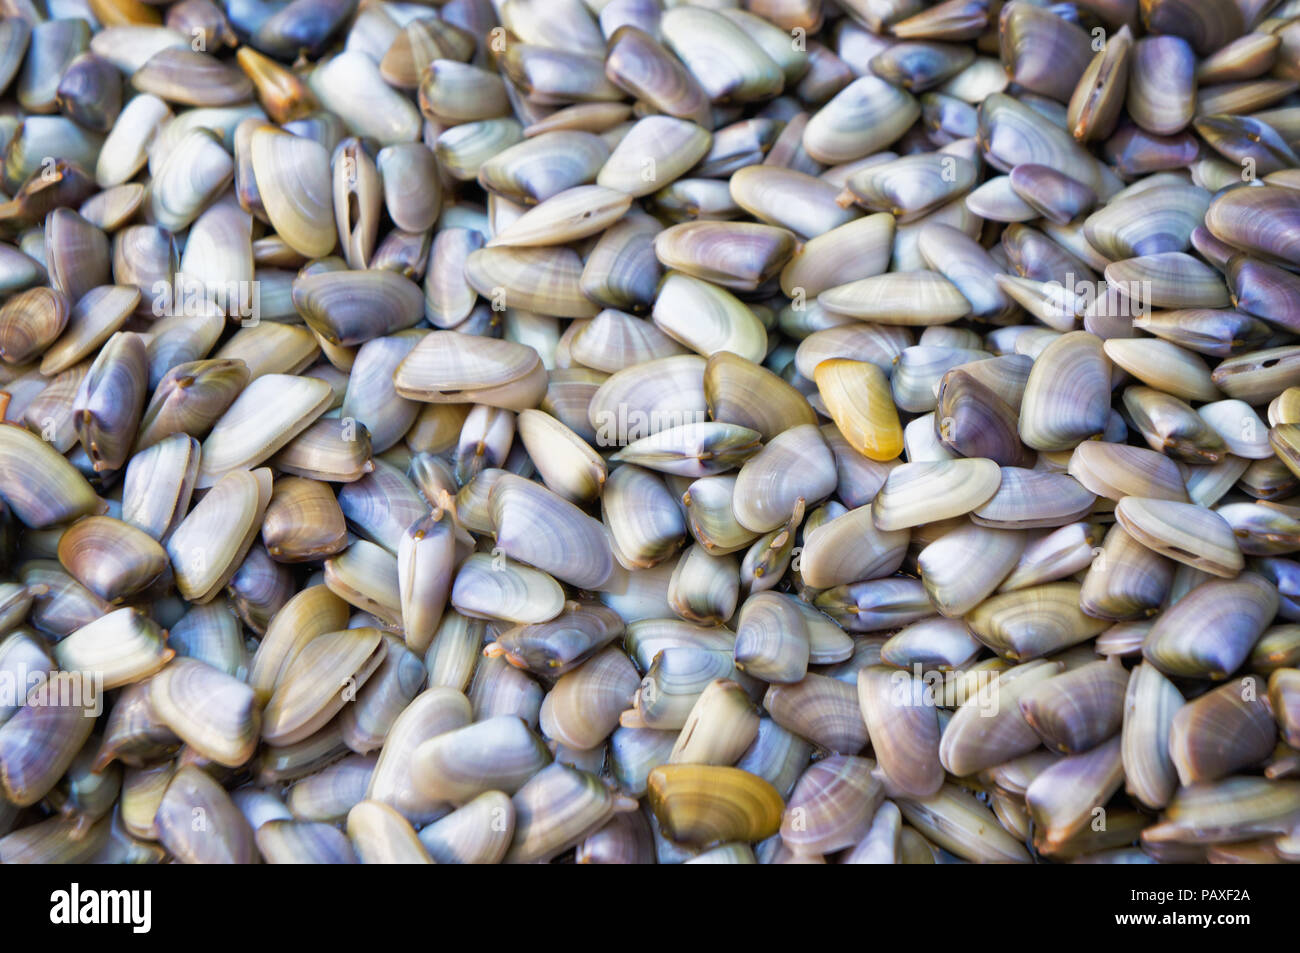 Saltwater clams background Stock Photo